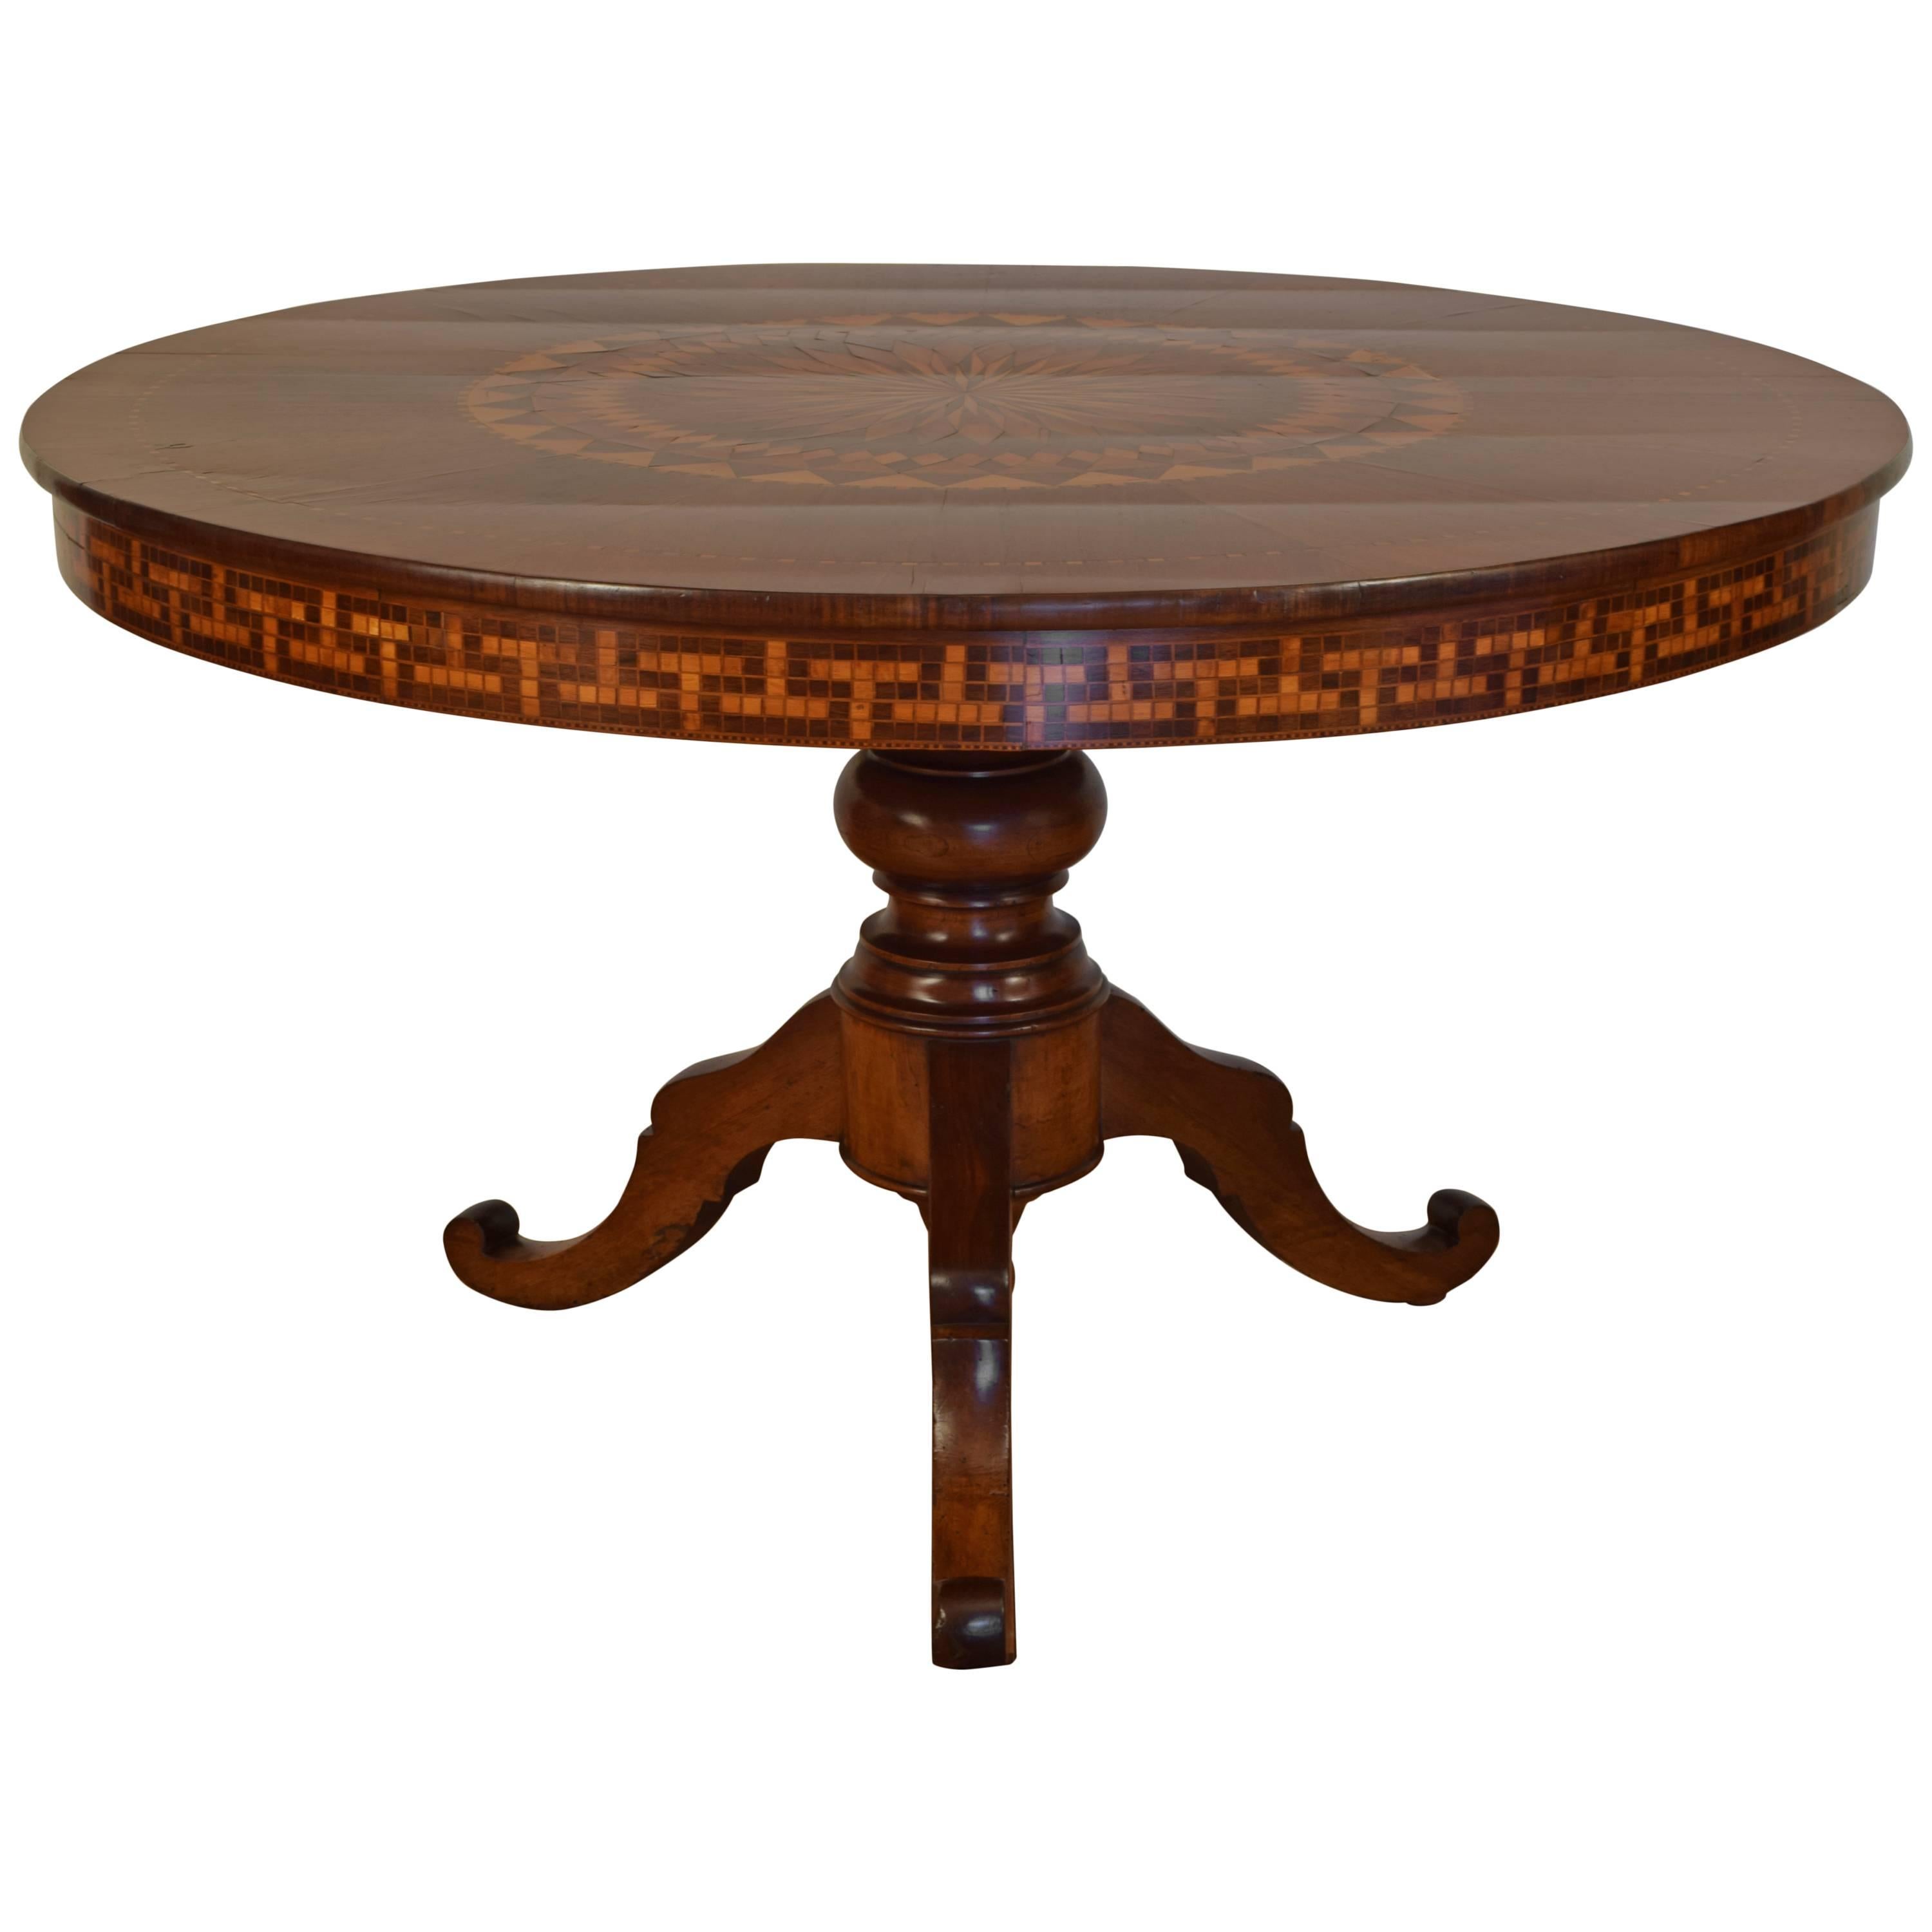 Italian Neoclassical Period Walnut and Inlaid Center Table